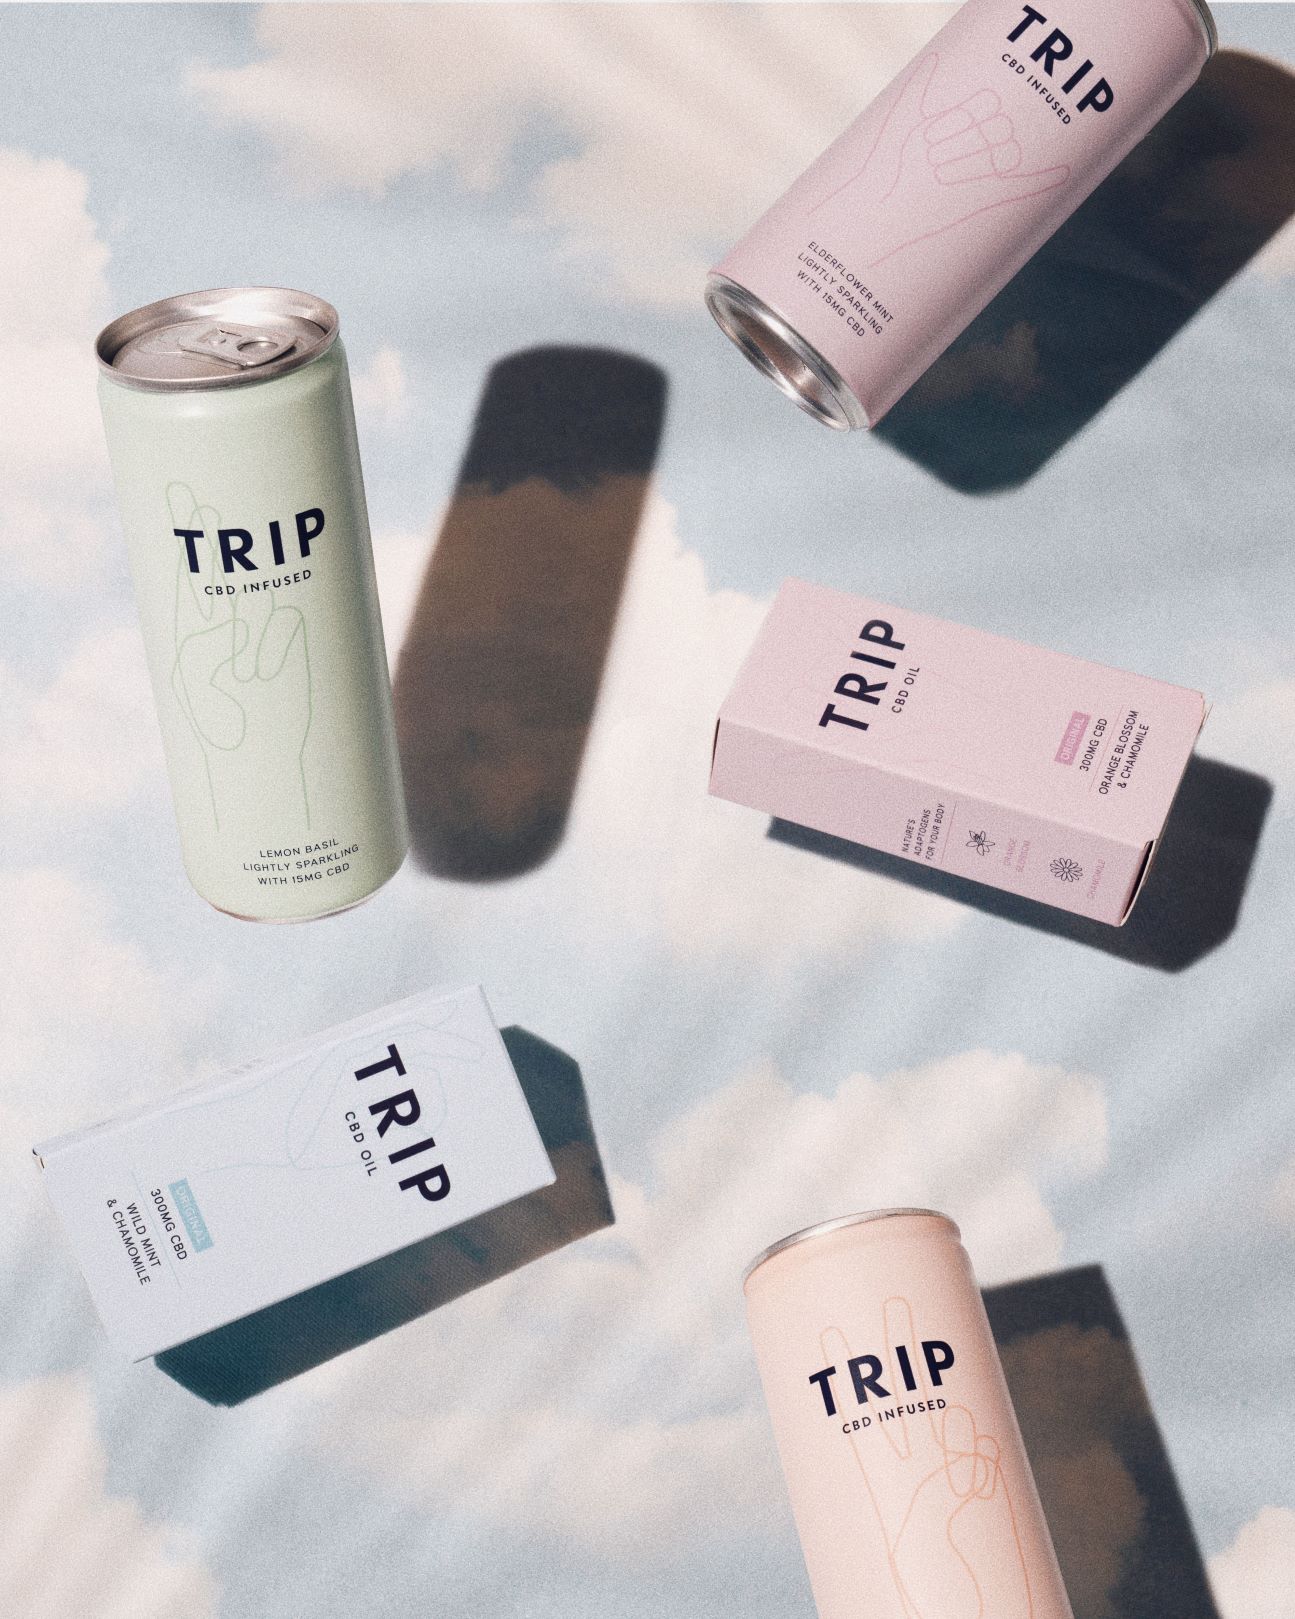 TRIP is the CBD drinks and oil brand that's helping people de-stress.